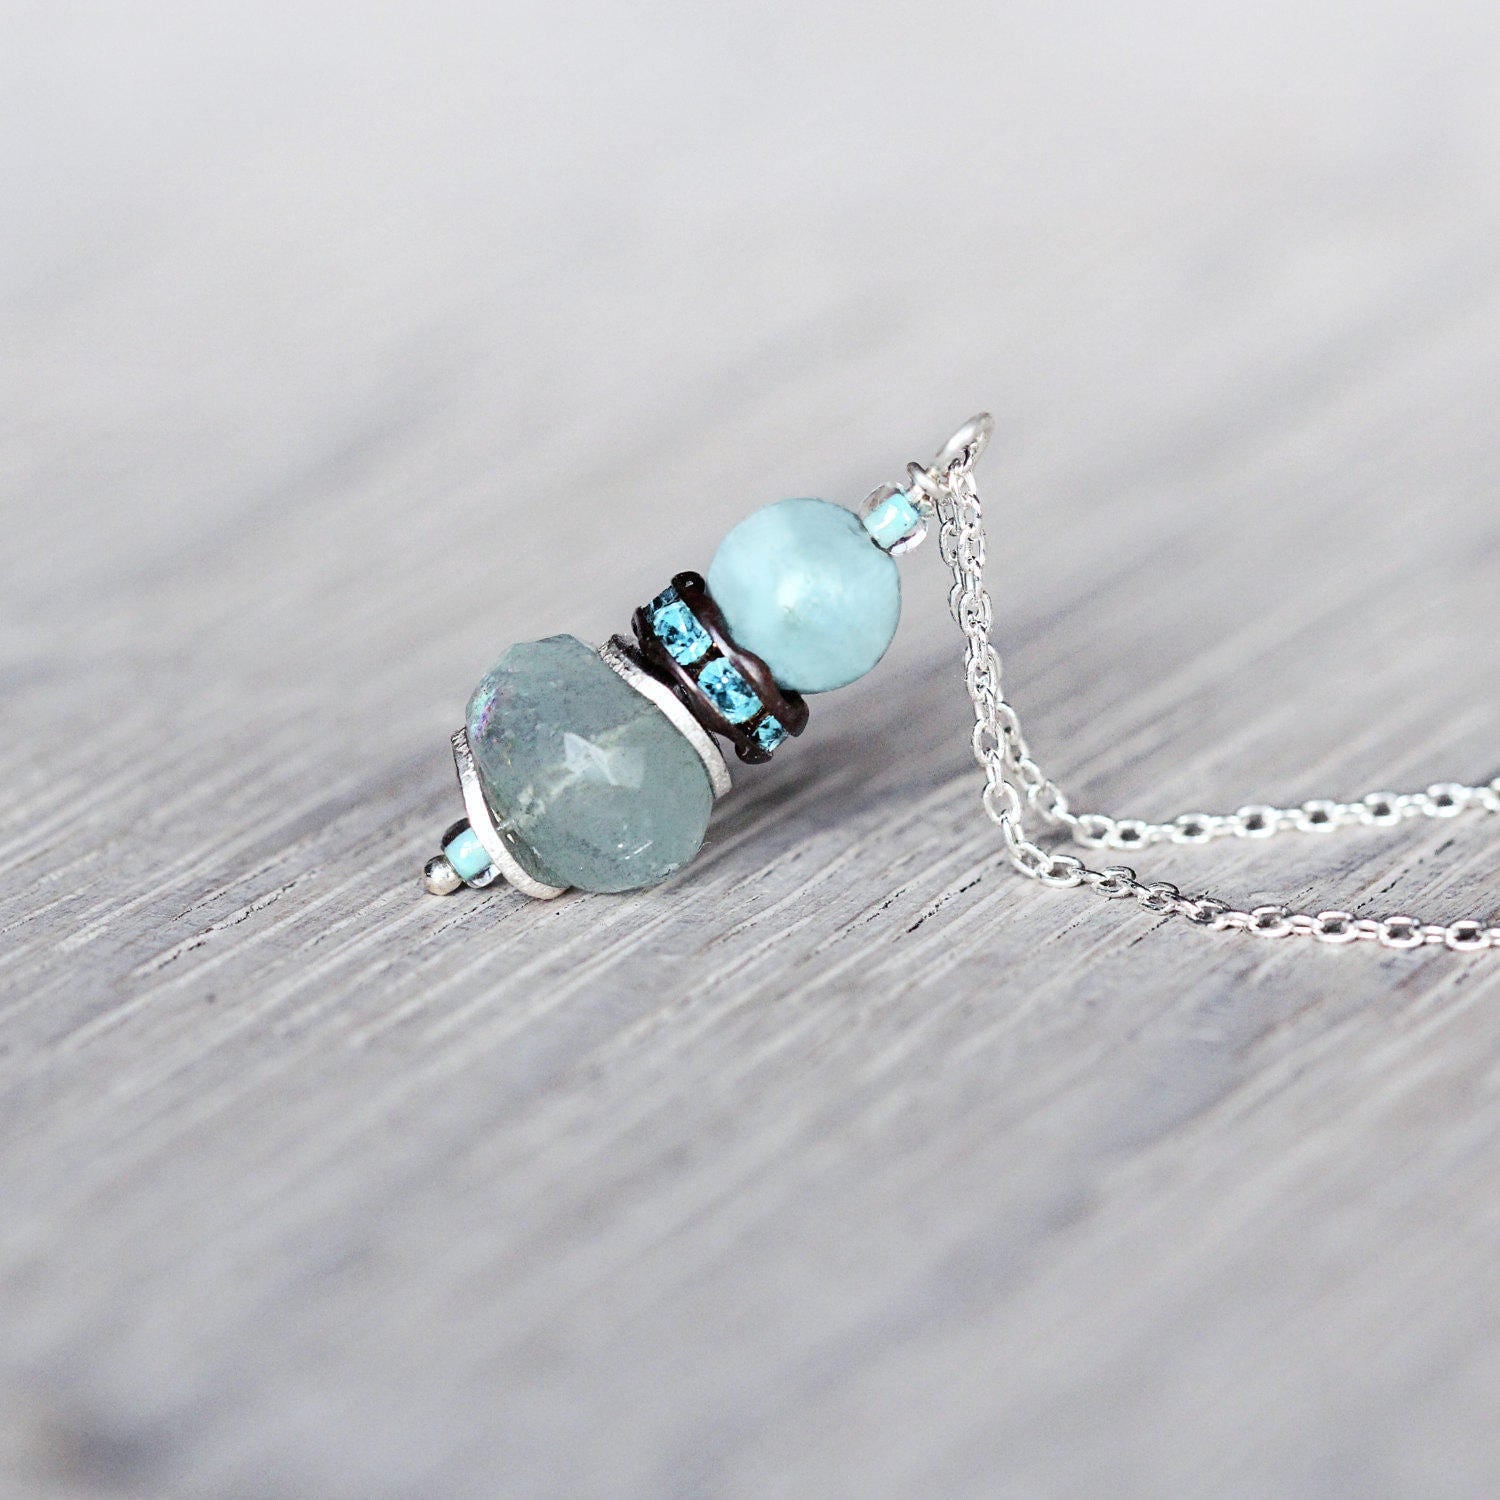 Aquamarine Pendant Necklace - Aquamarine Jewellery - Blue Crystal Necklace - March Birthstone - Dainty Necklace - Blue and Silver Necklace